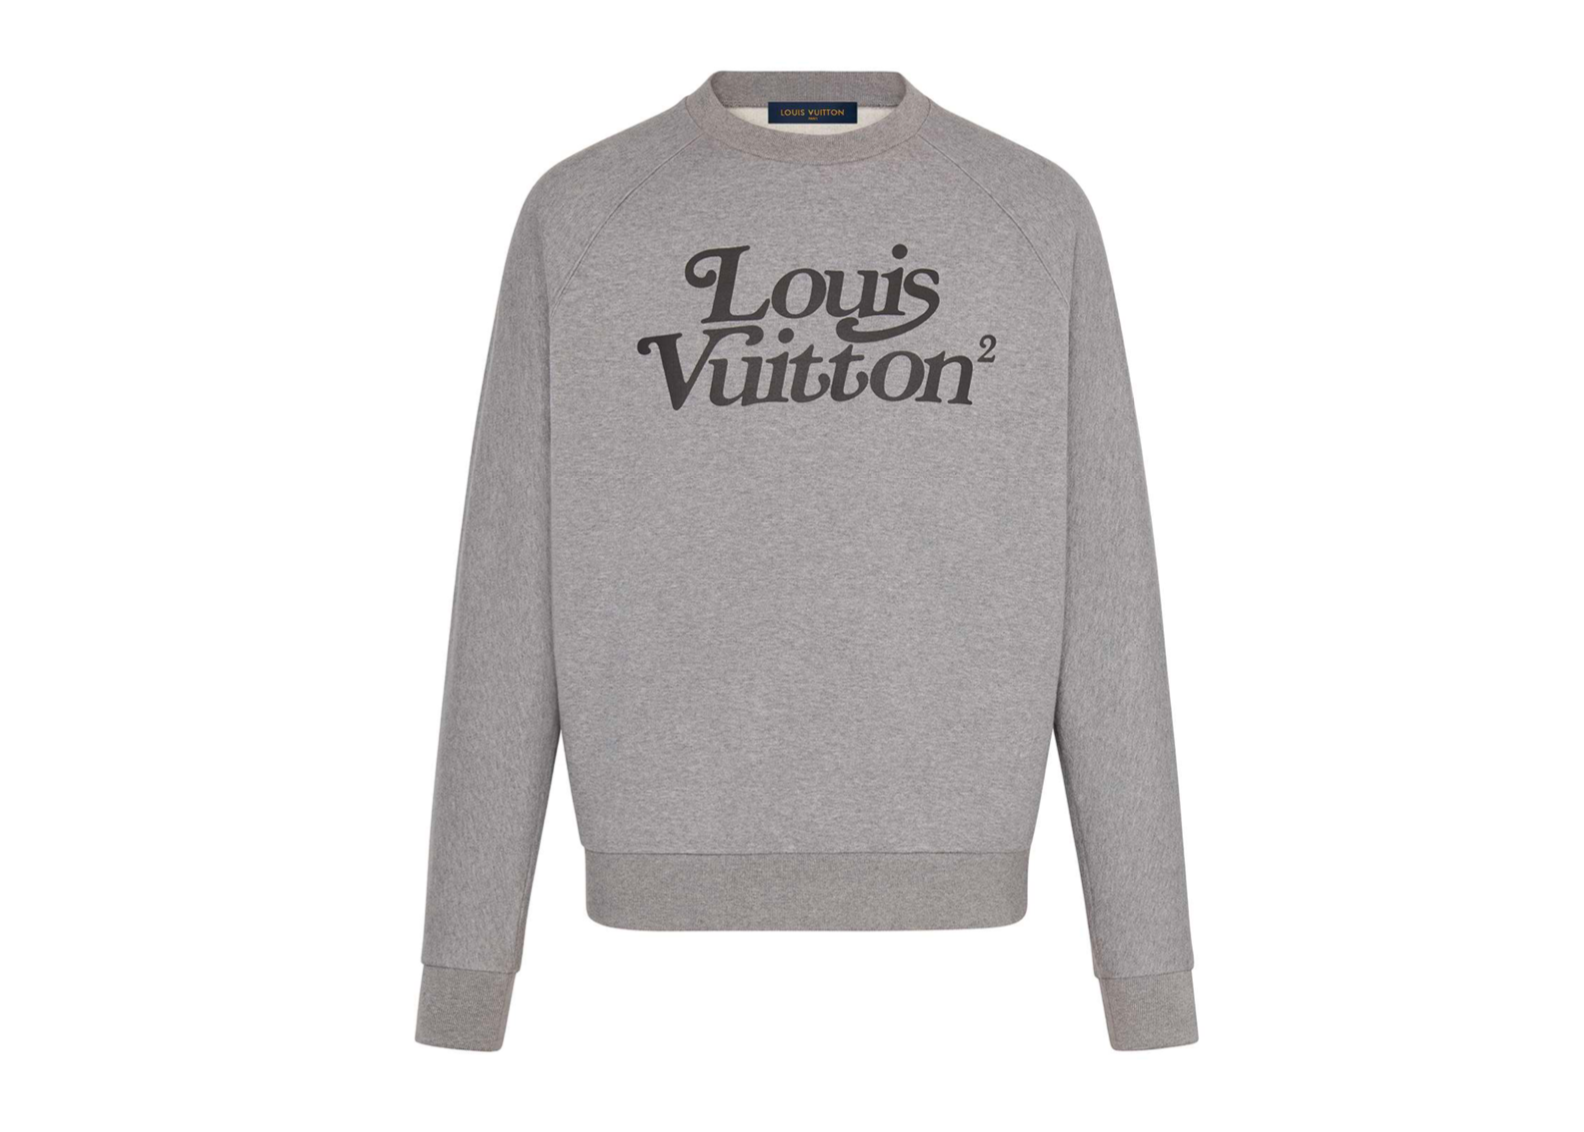 TimeToCop - TOP 100 Louis Vuitton Streetwear items most expensive 